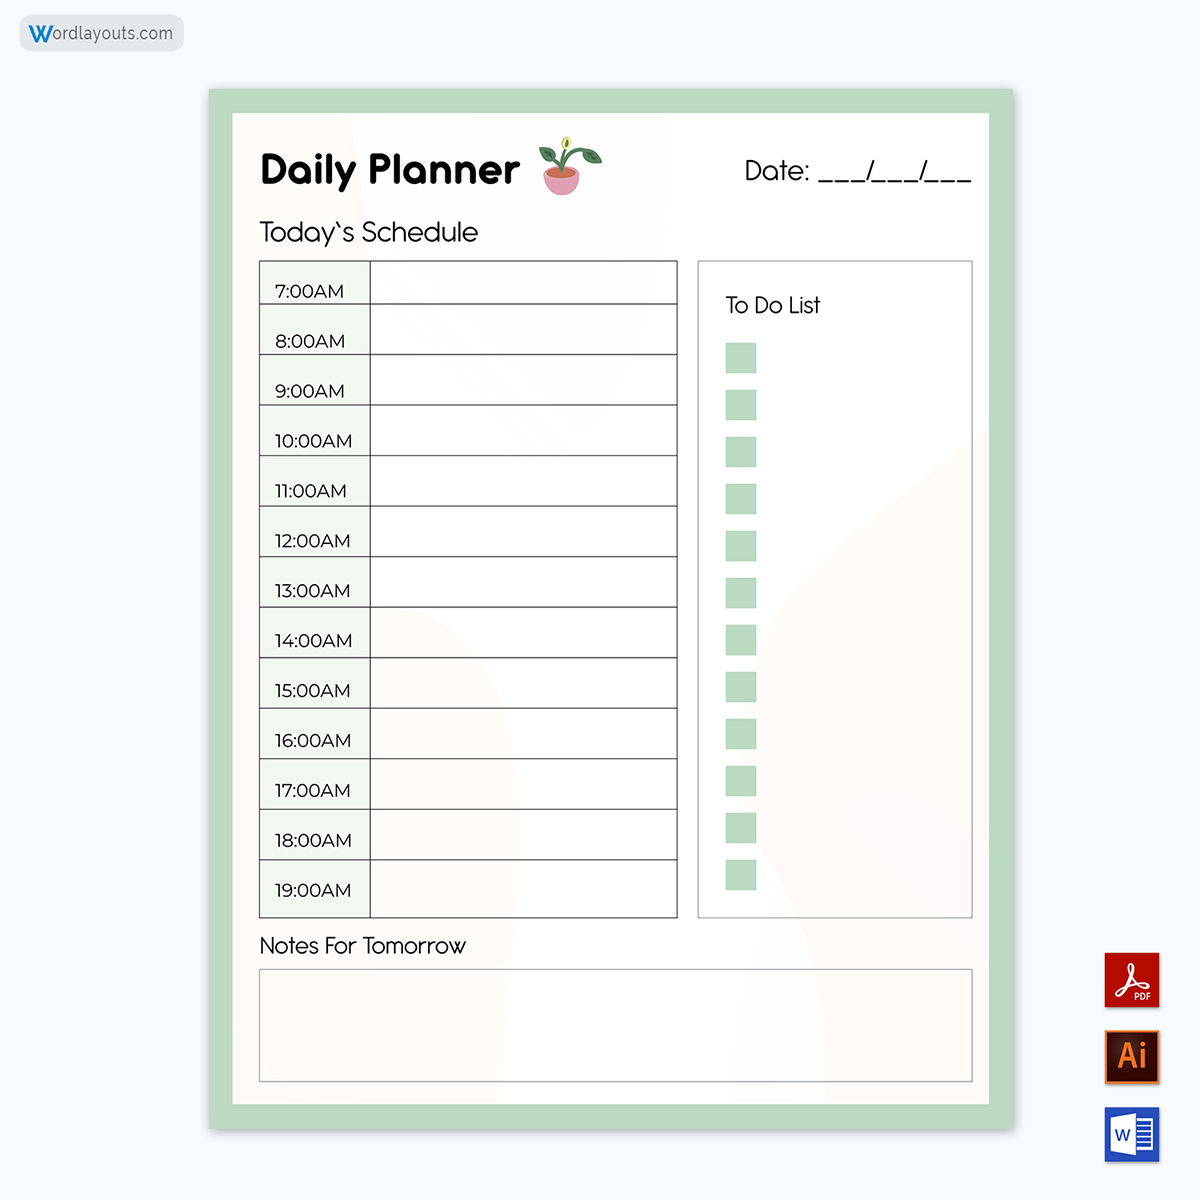 Daily-Planner-Template-8669ndnjp-06-23-p04